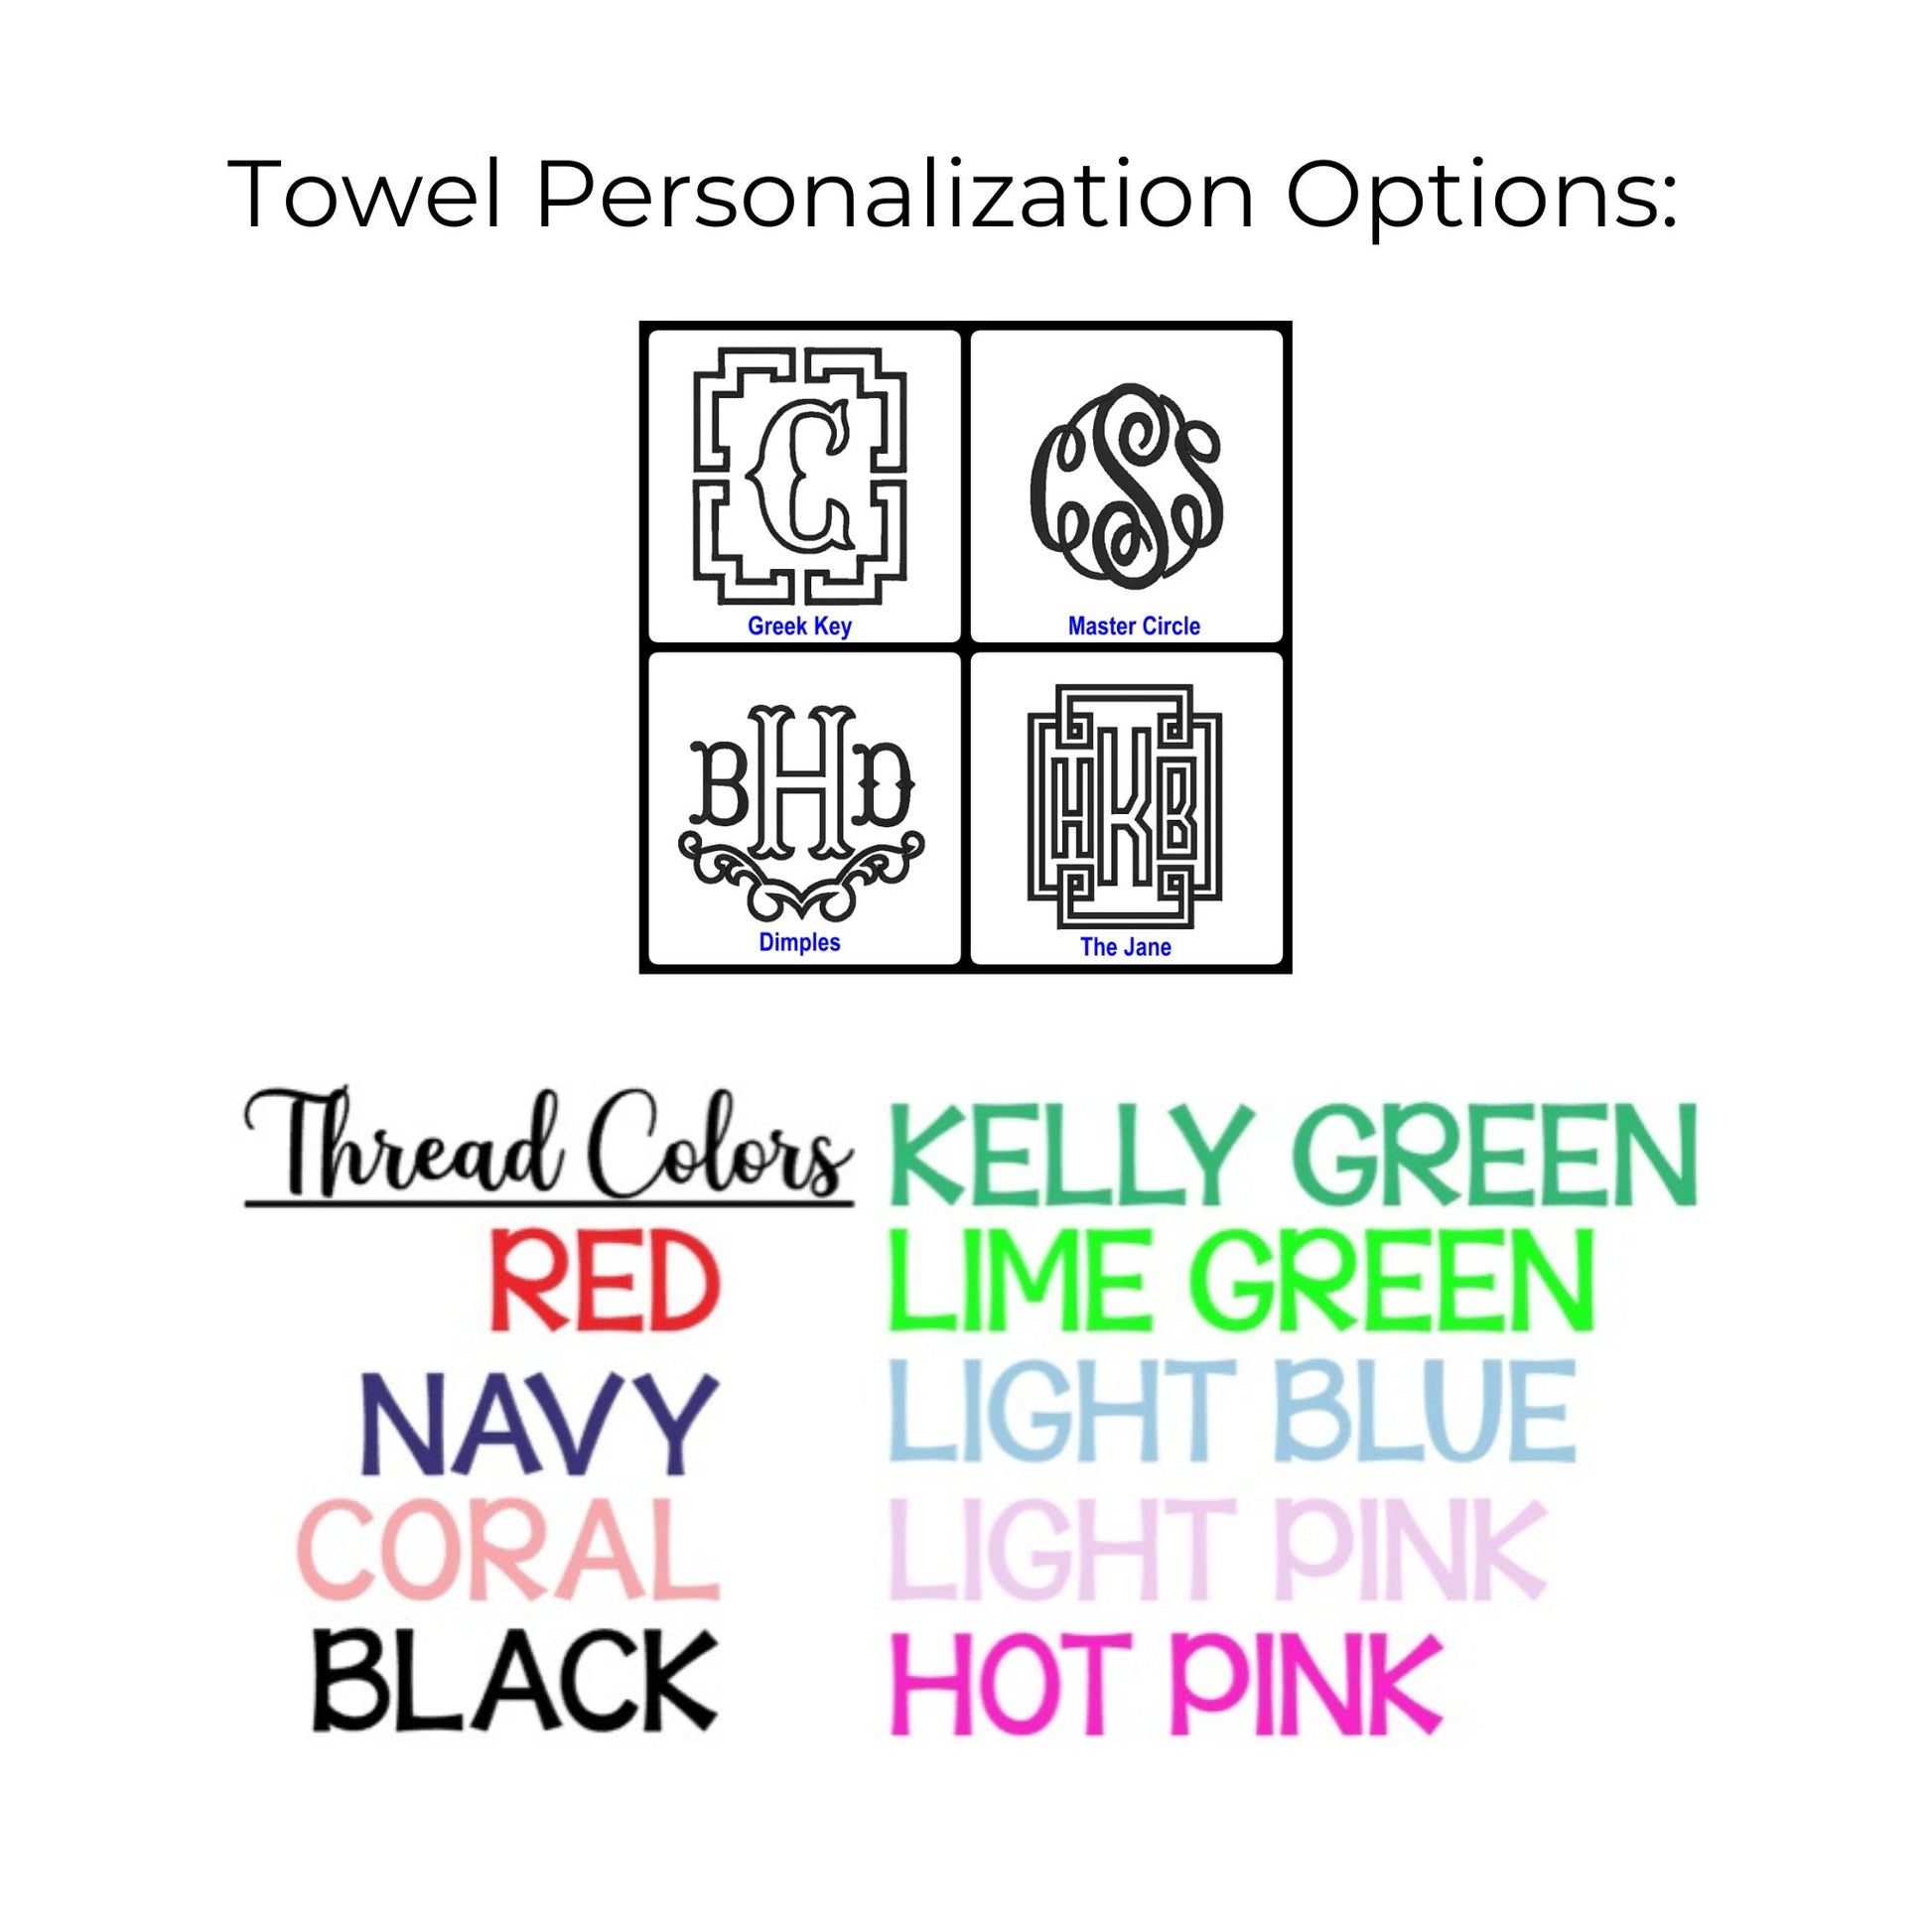 Personalization layout and color options by Winston's Collection